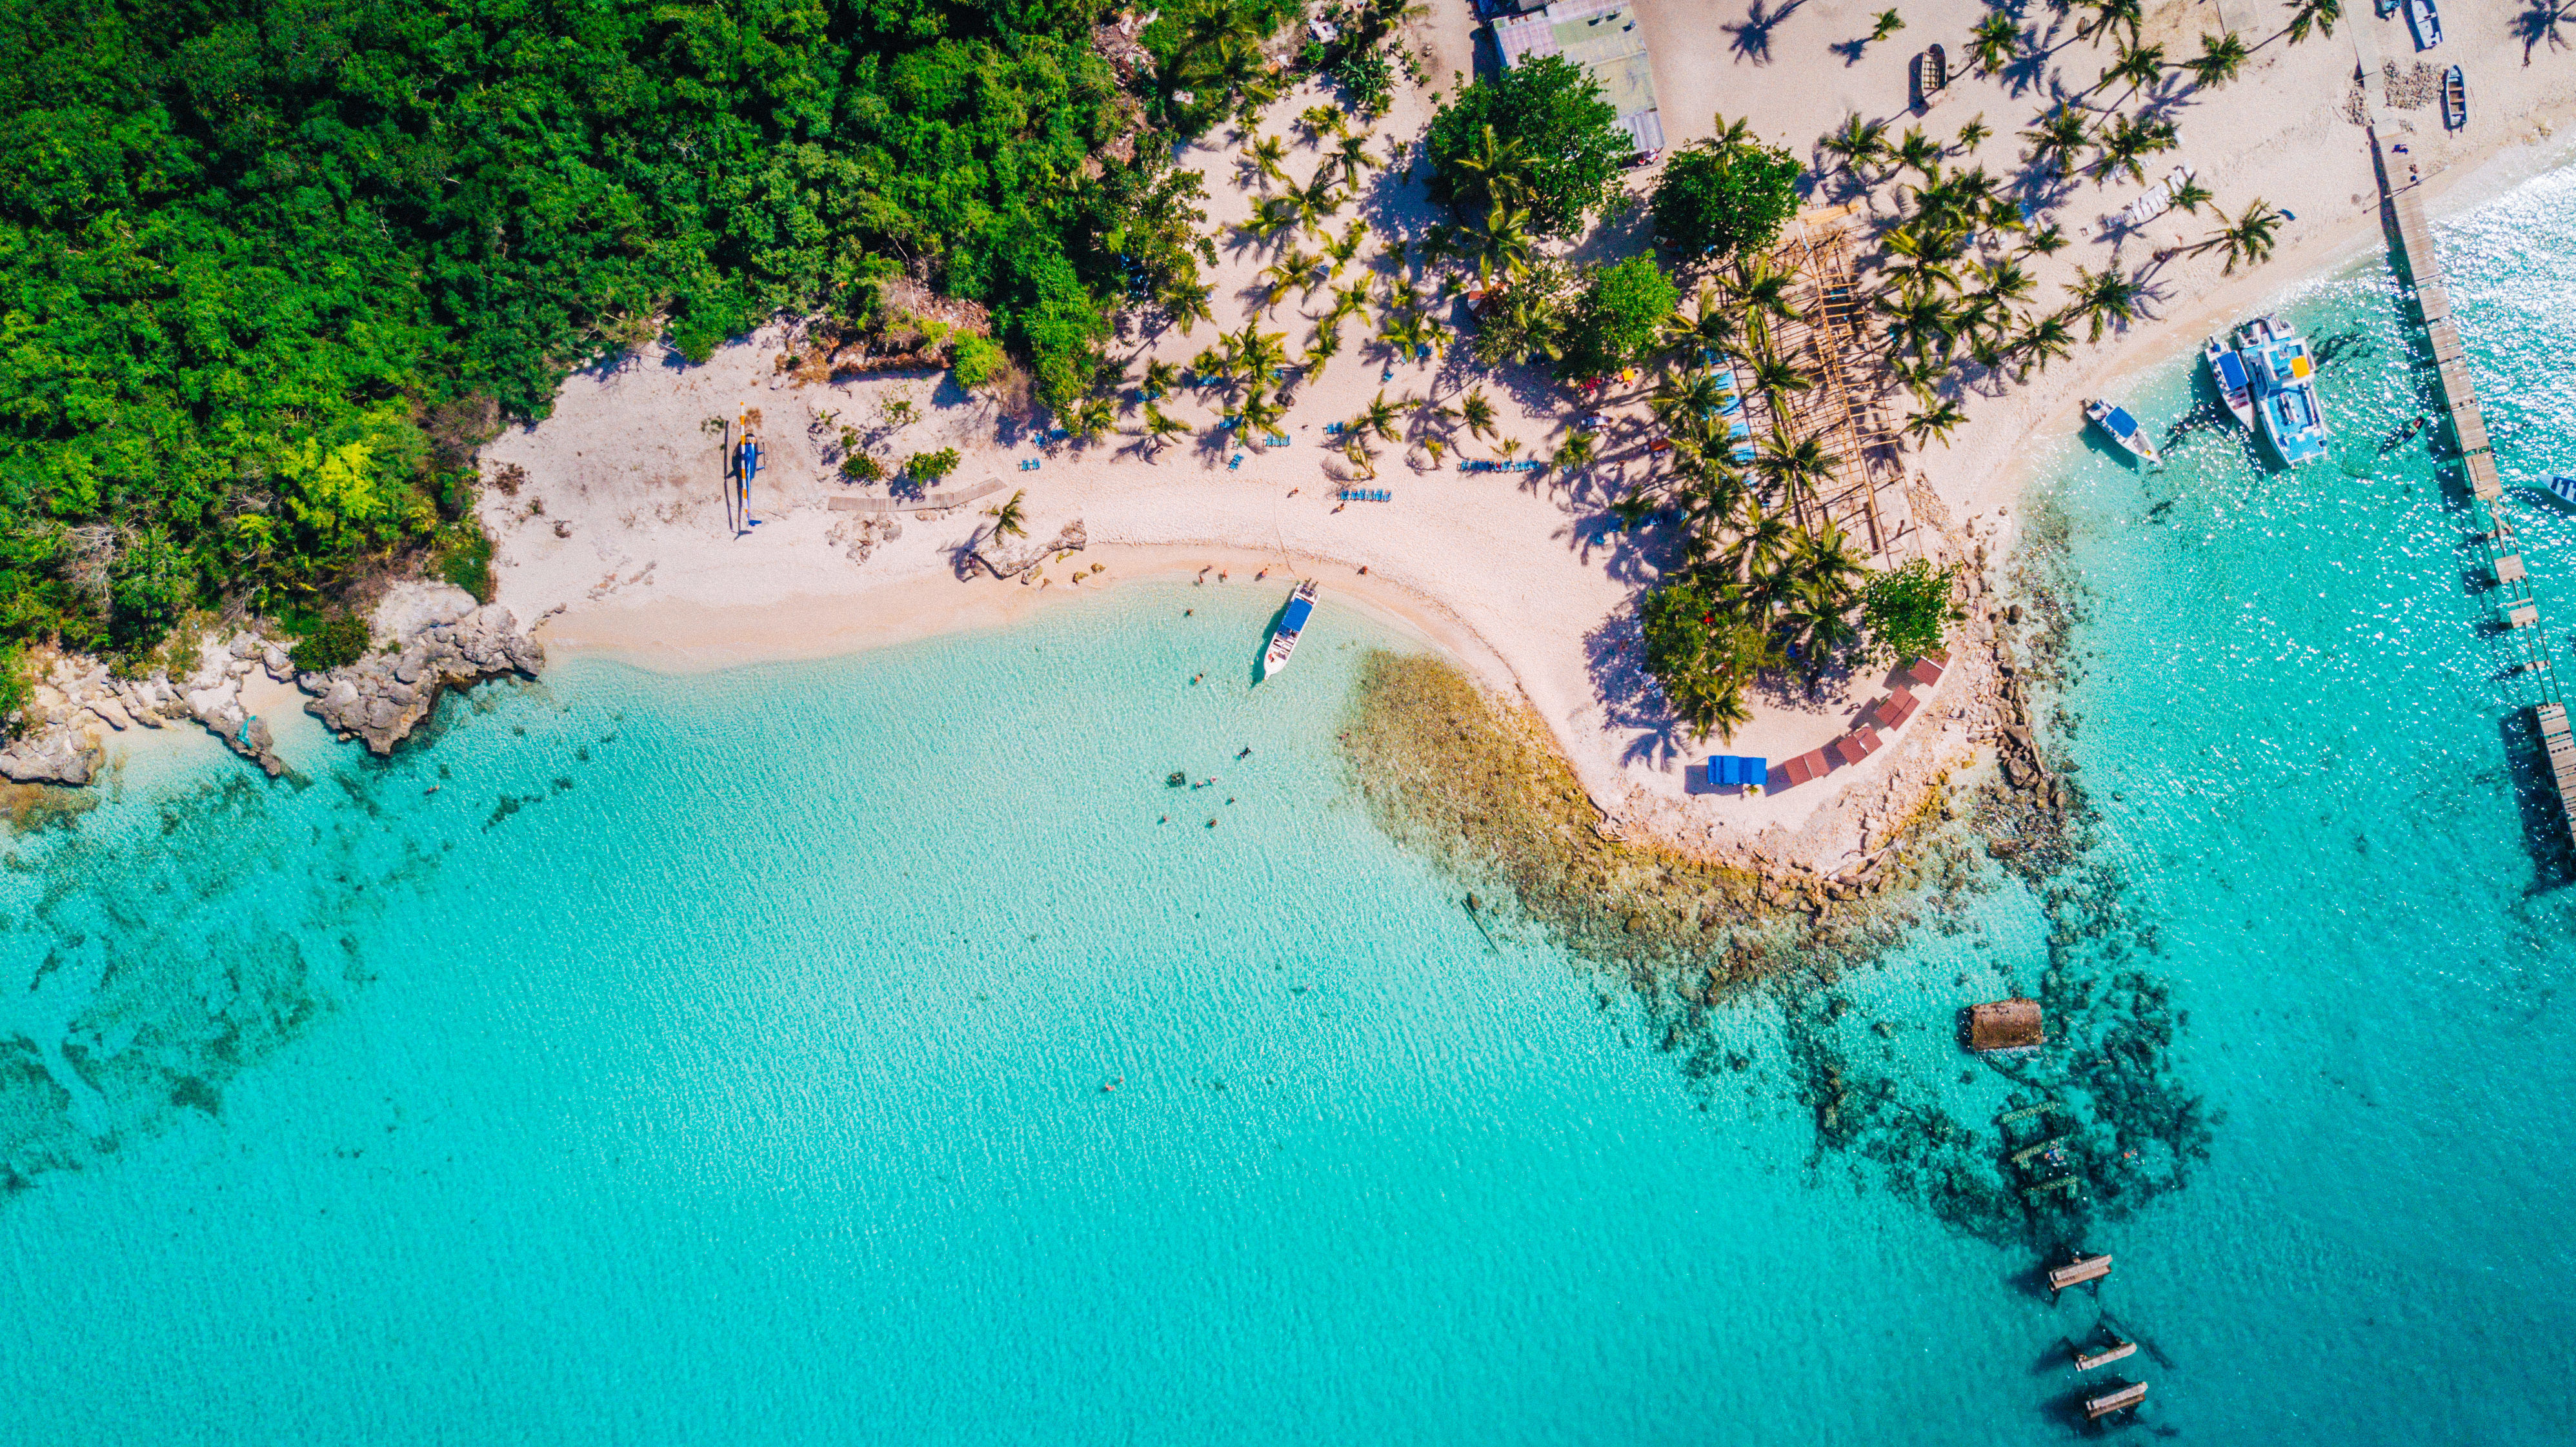 Aerial drone view of reef, trees and beach in a tropical landscape with boats in Dominican Republic.